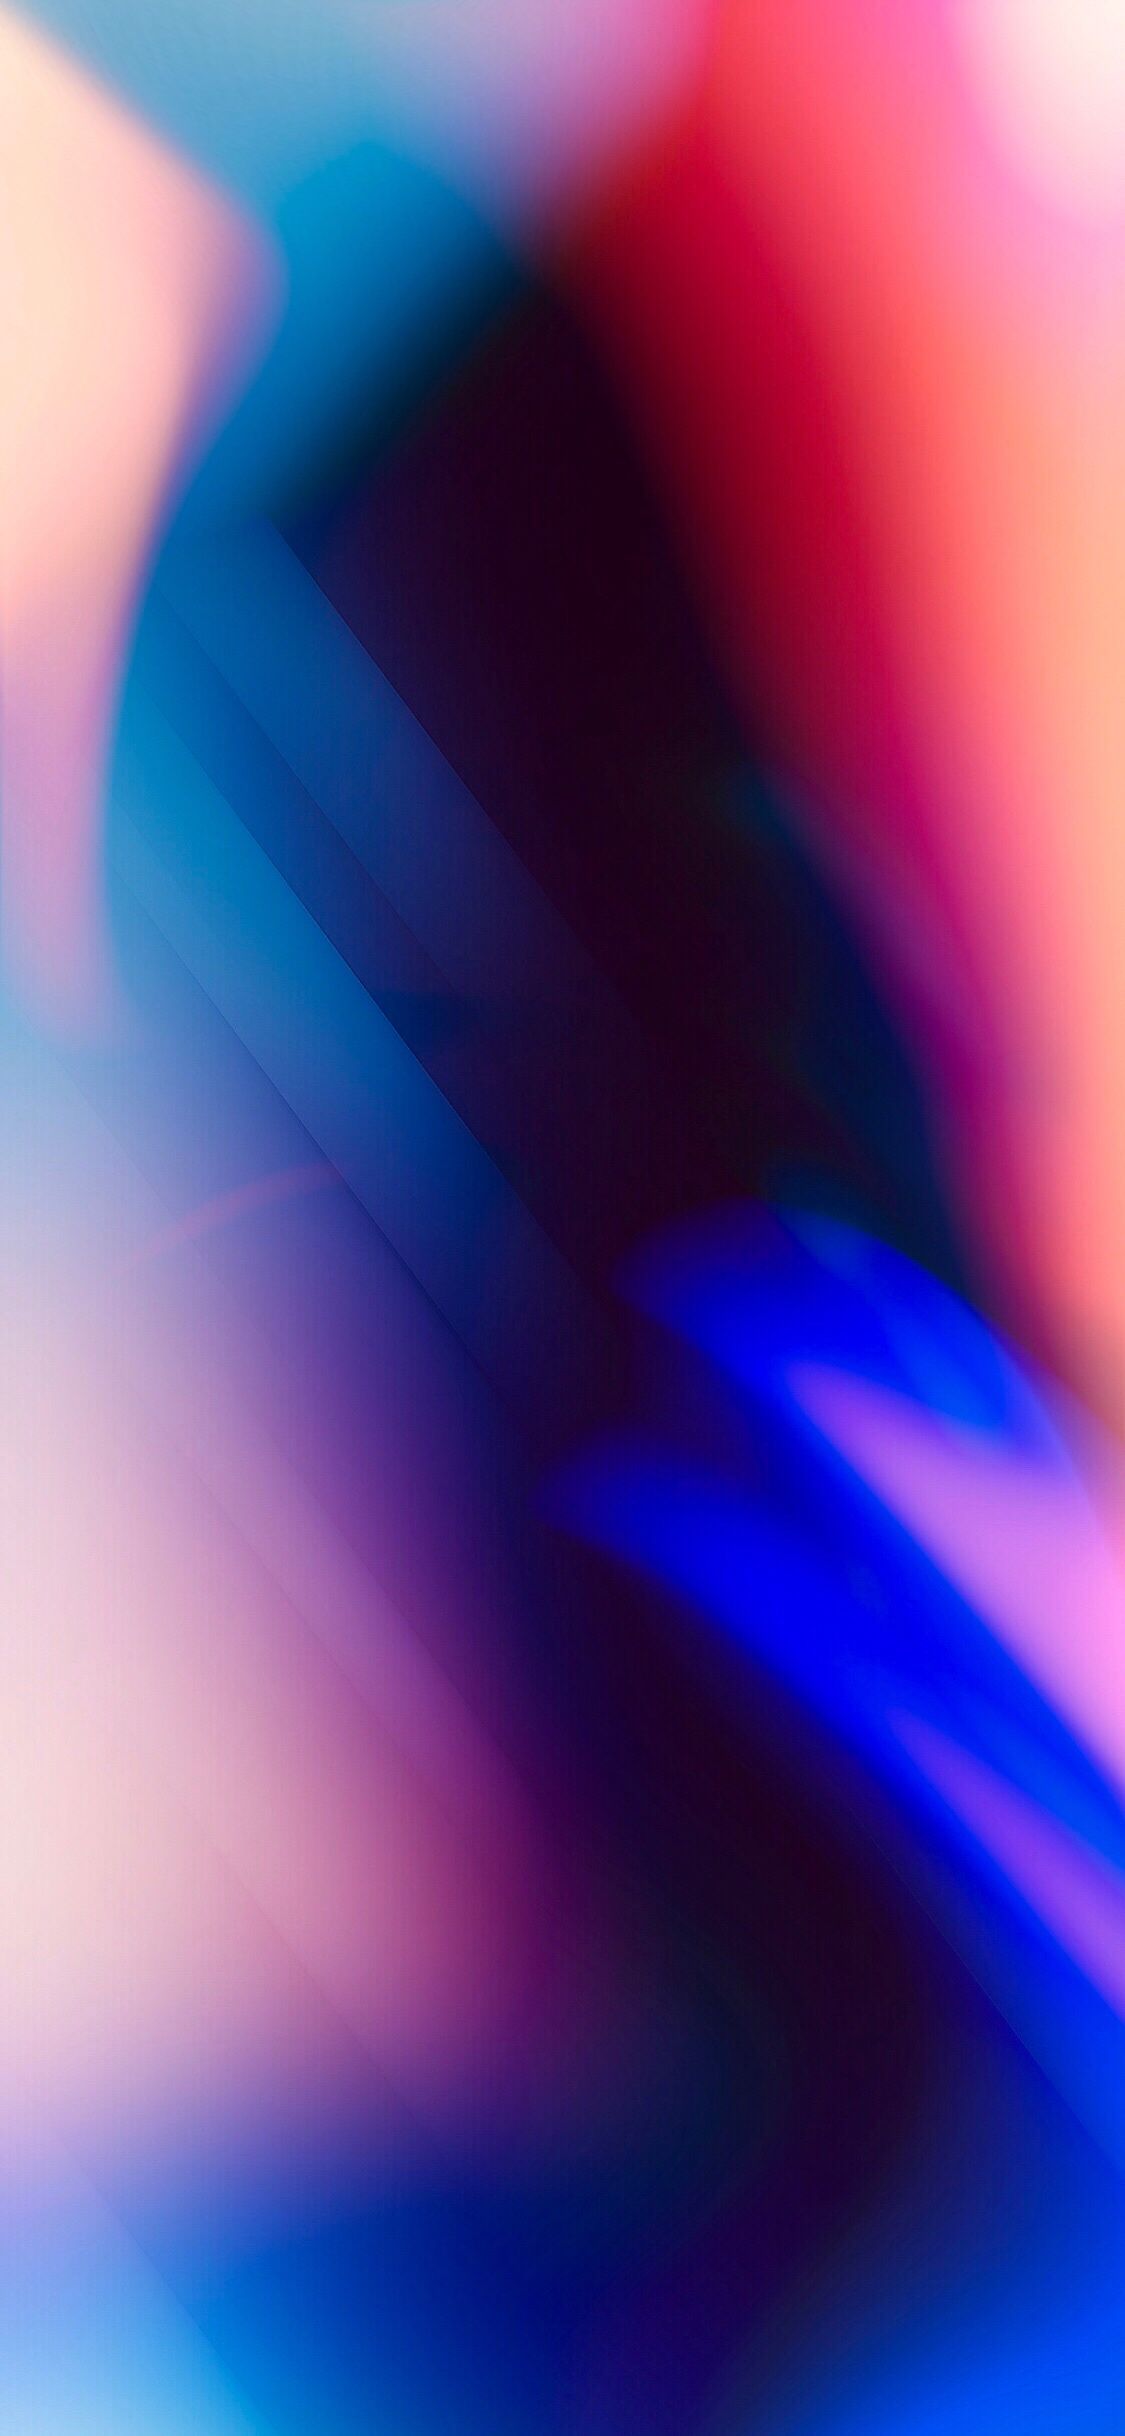 Download iphone x abstract wallpaper HD